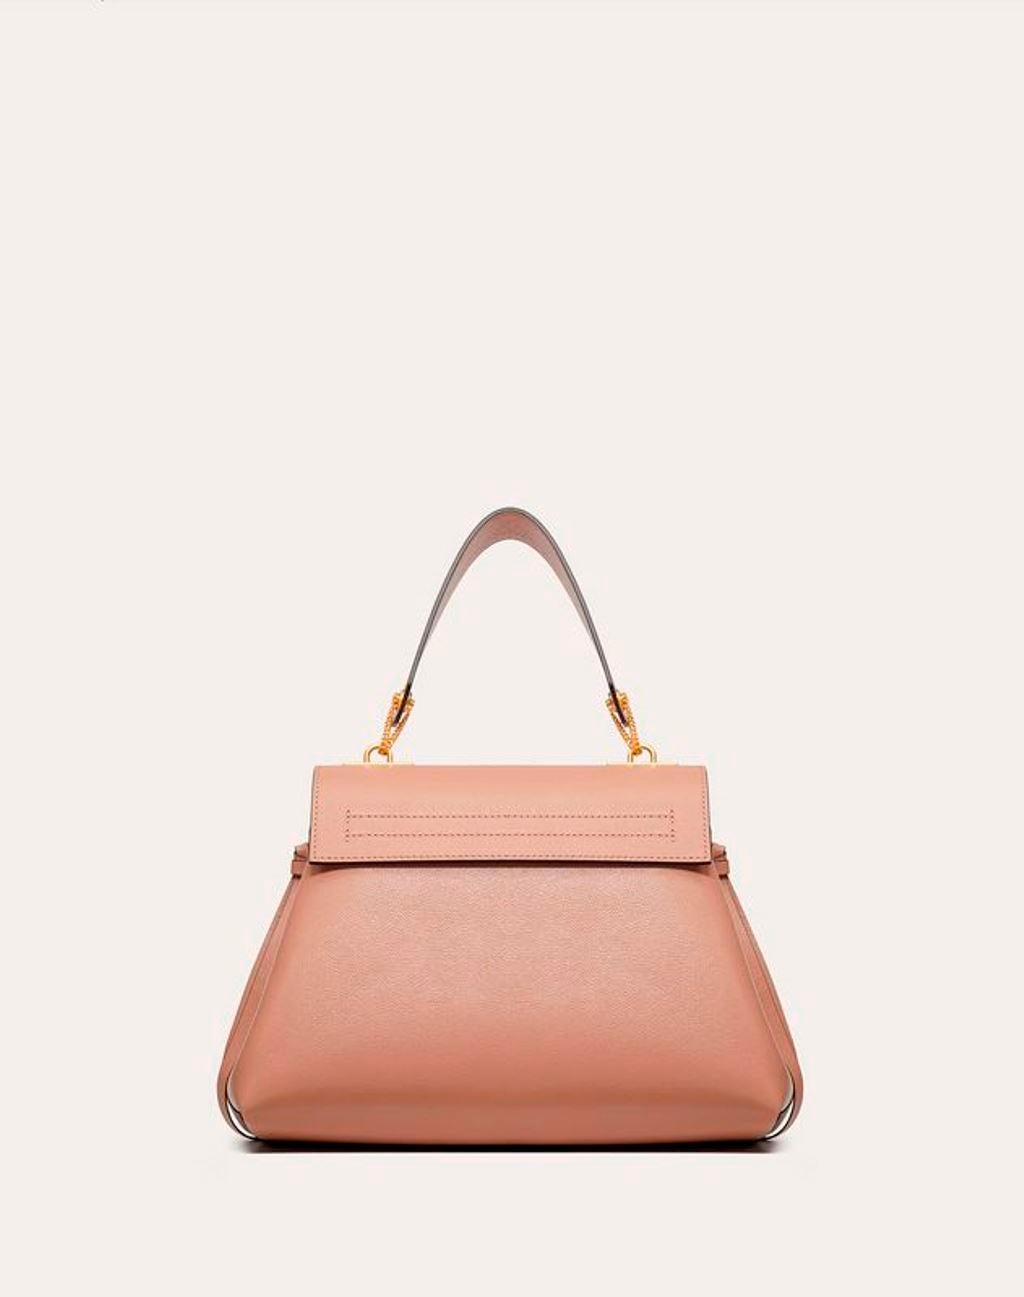 Valentino is one name that we can always count on for the latest in trends and the most versatile styles that stand the test of time. This top handle bag is one such creation featuring a gorgeous body accented with a front flap that carries the